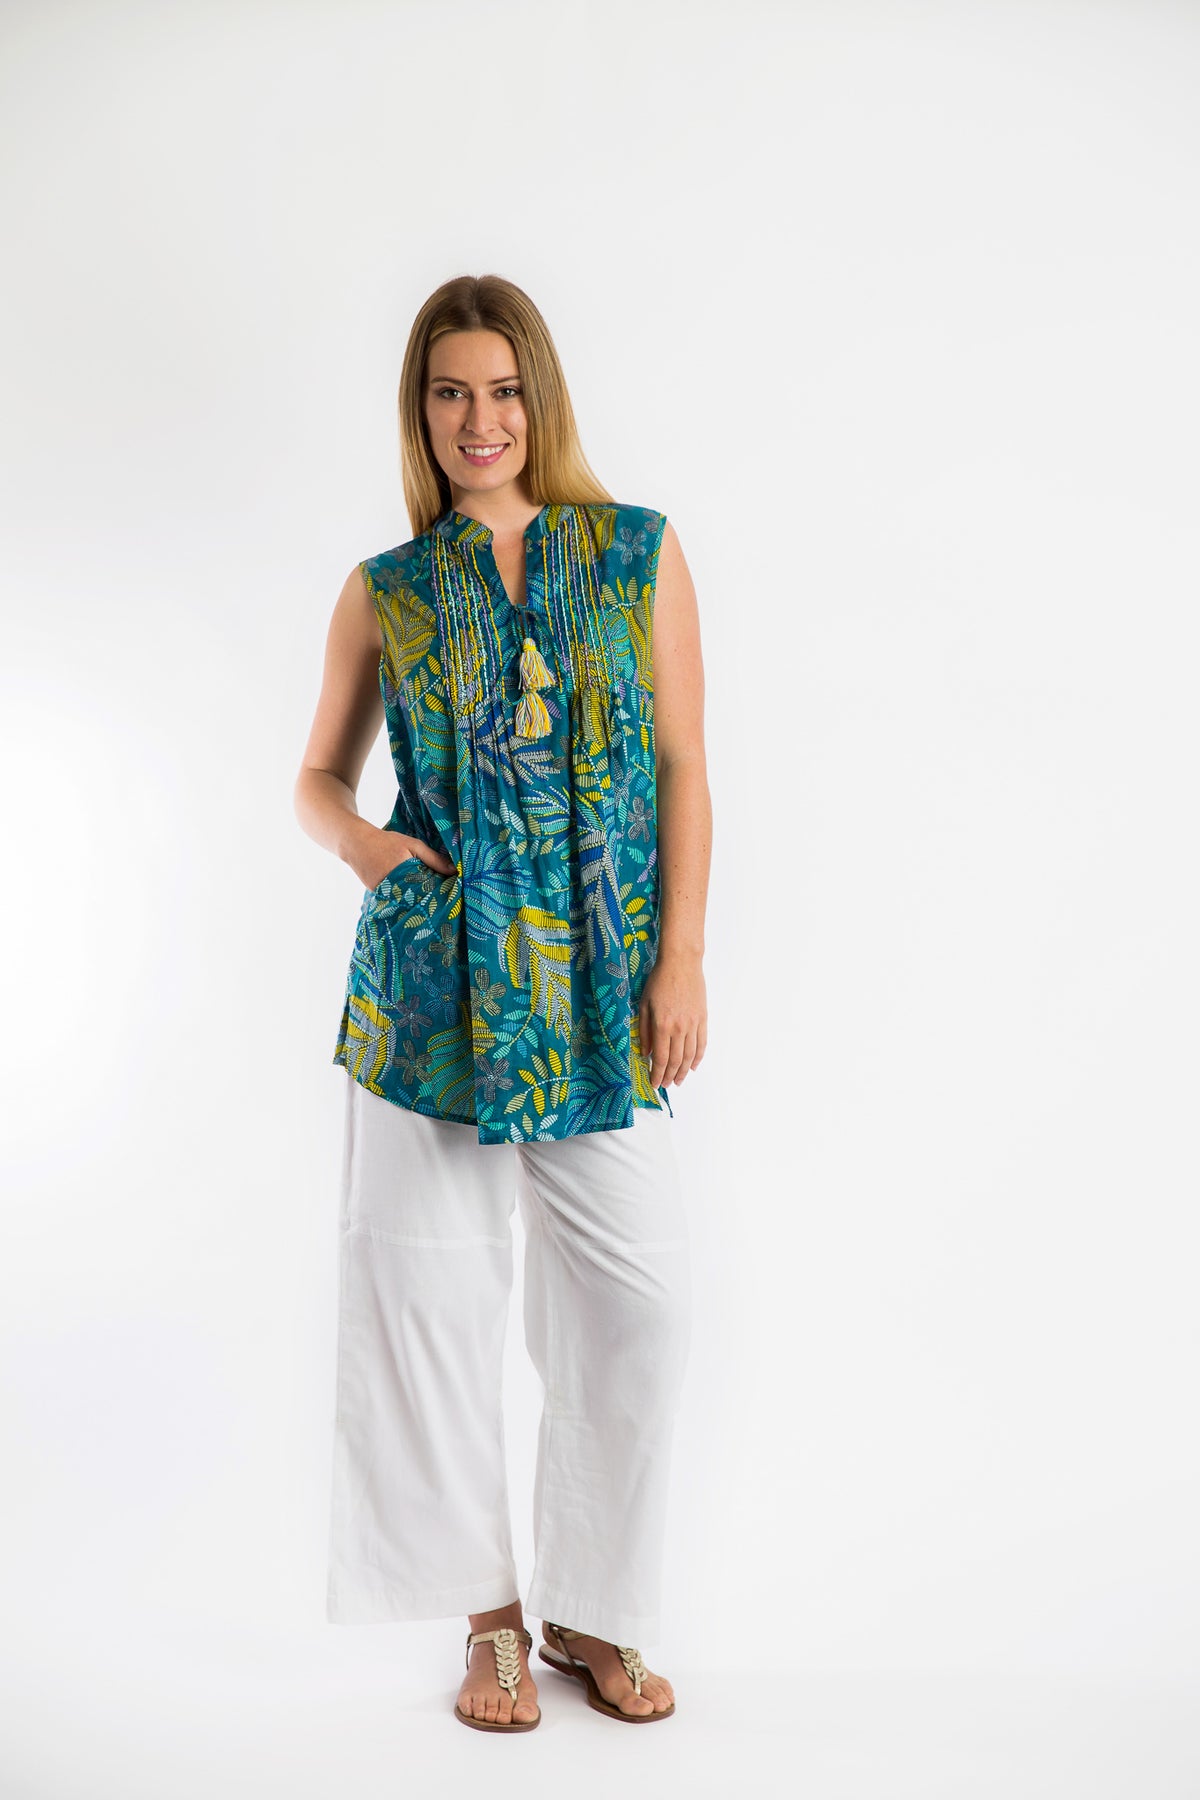 Casuarina Embroidered Top in Turquoise Fern